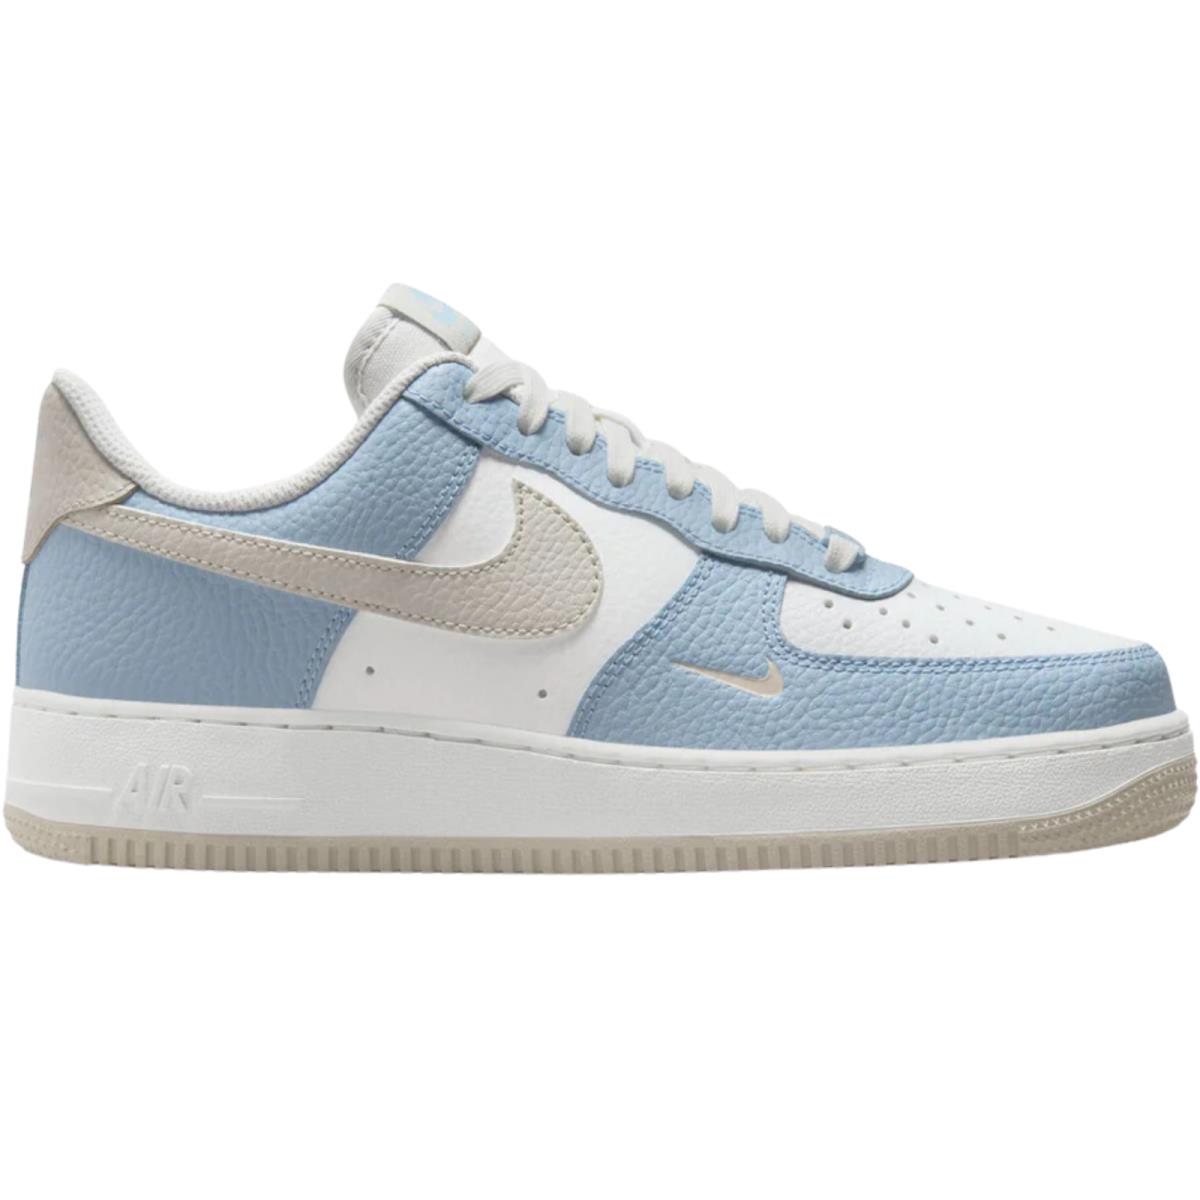 Nike Air Force 1 Women`s Casual Shoes All Colors US Sizes 6-11 Light Armory Blue/Light Bone/Summit White